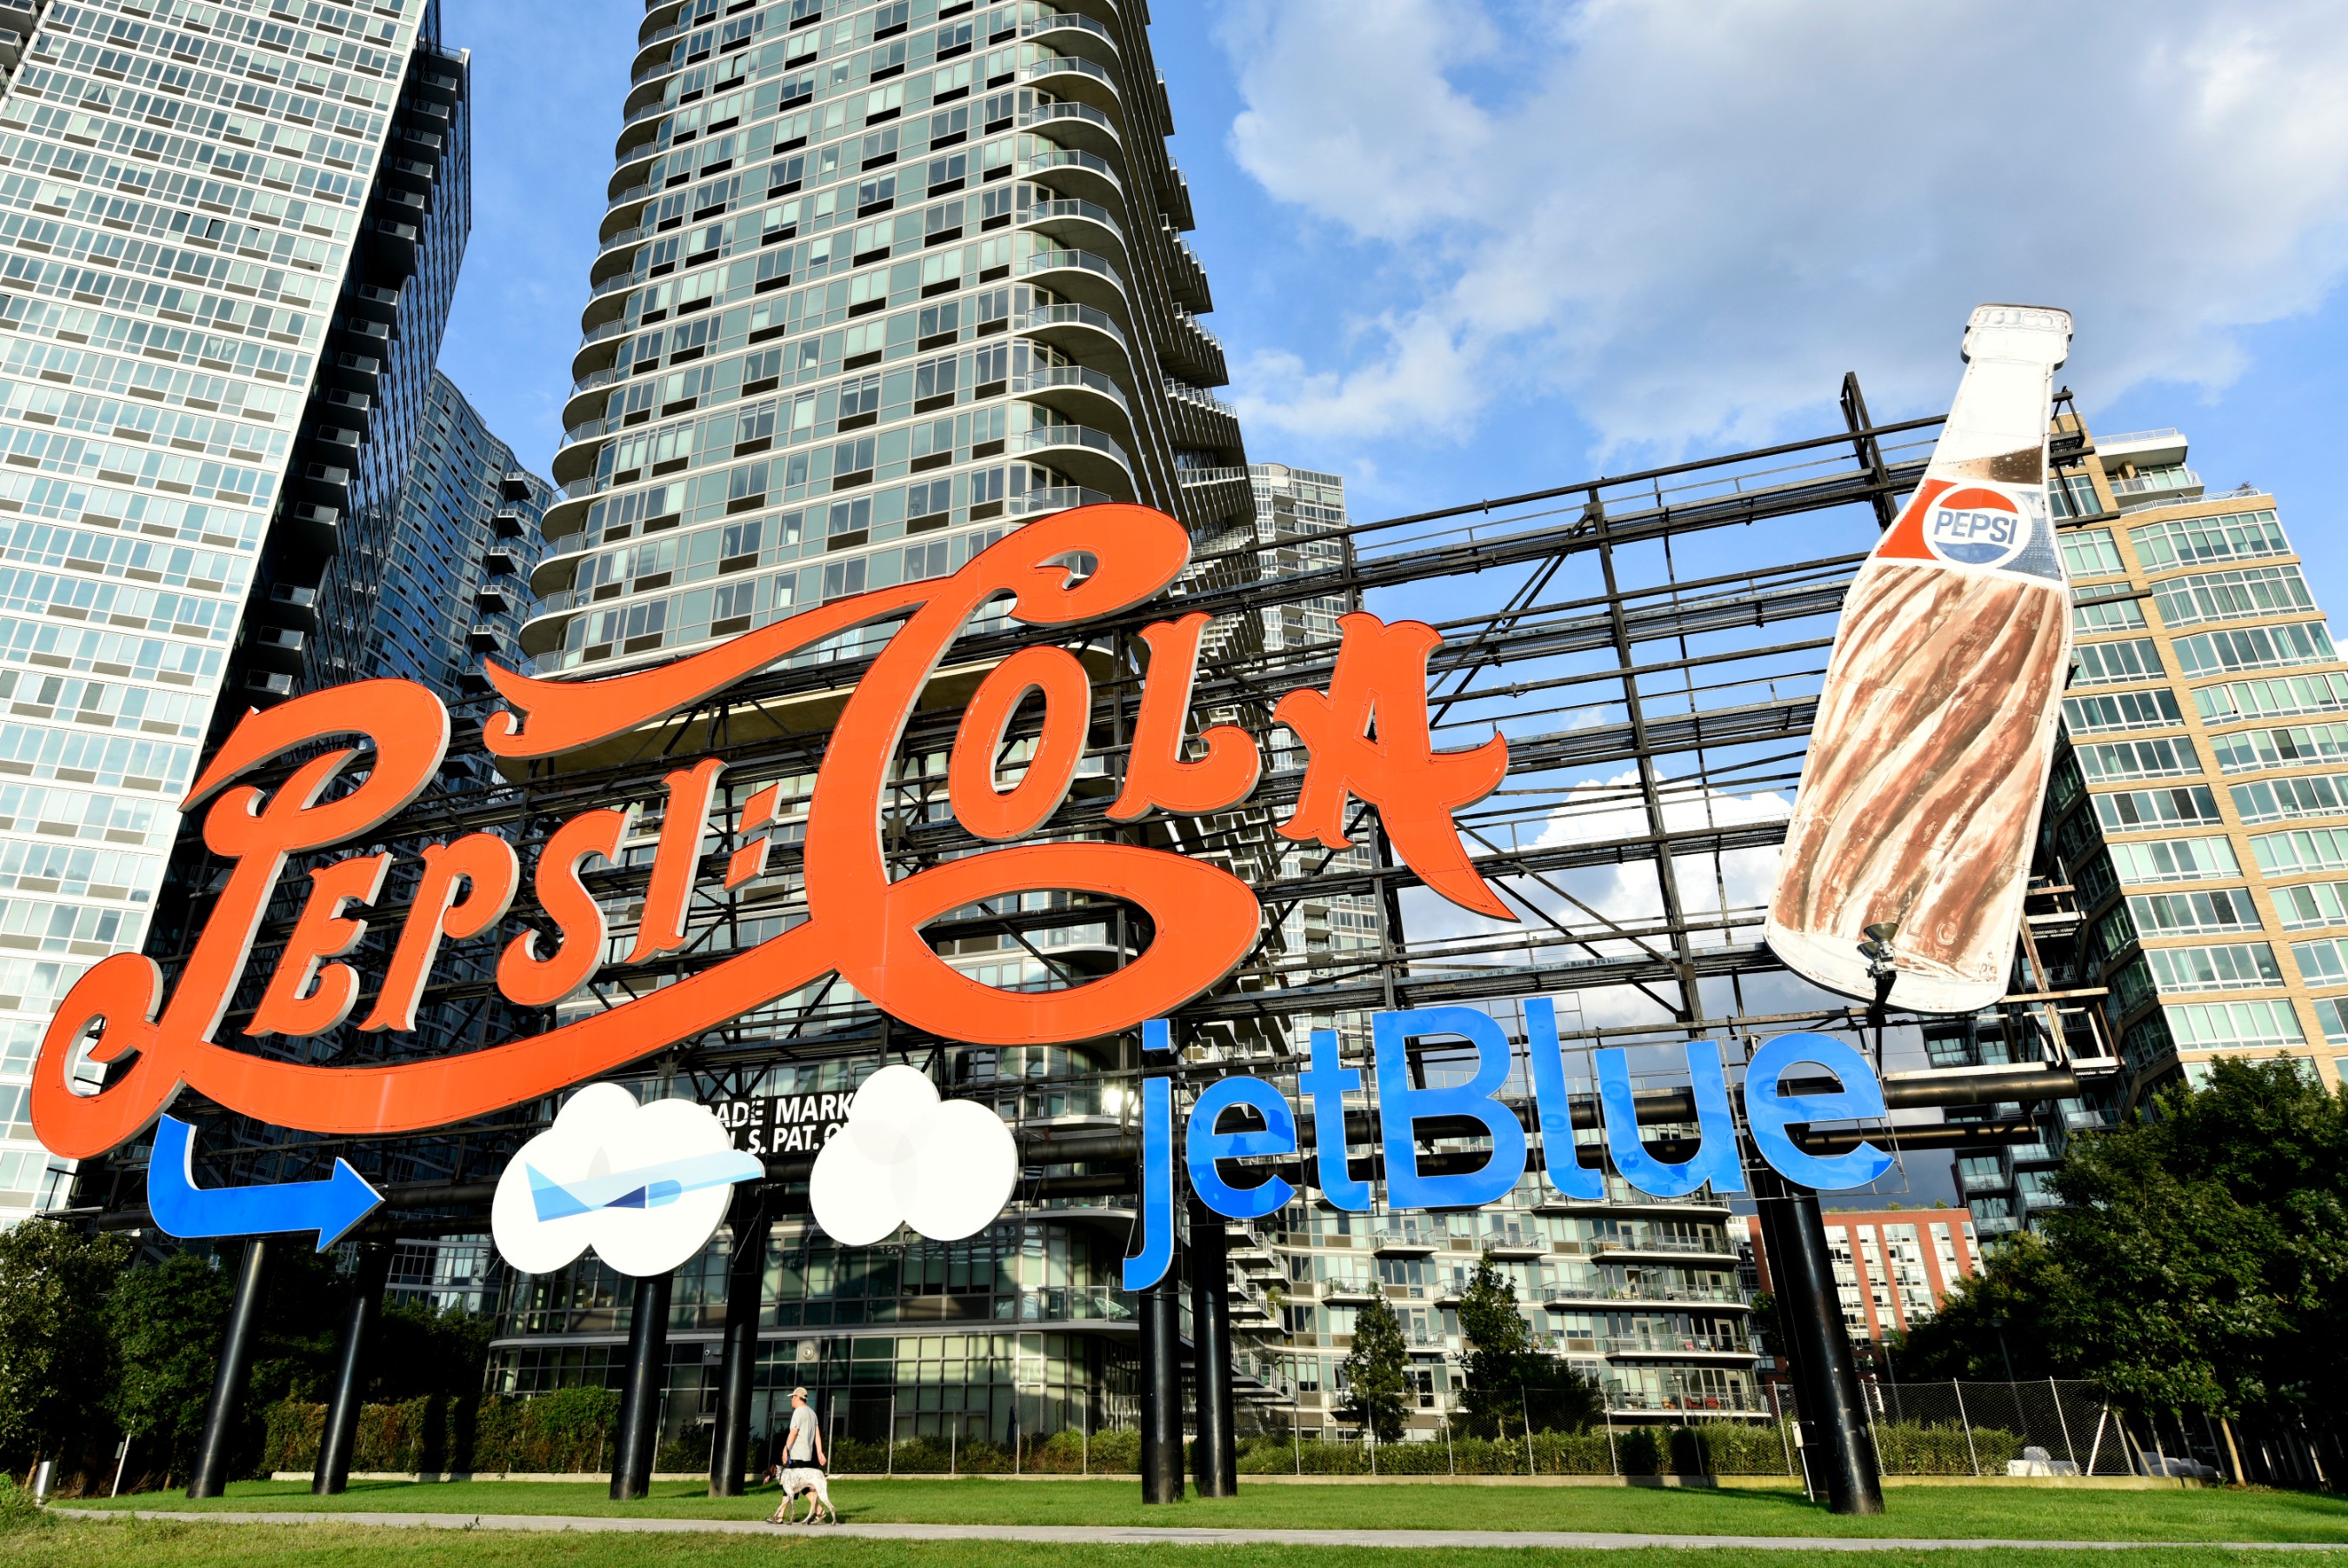 For the first time ever, PepsiCo temporarily added JetBlue branding to its world-famous Pepsi-Cola sign, which will be visible to New Yorkers and visitors through September. The temporary installation of the sign brings together the two brands in celebration of the new partnership between these two New York-based companies.